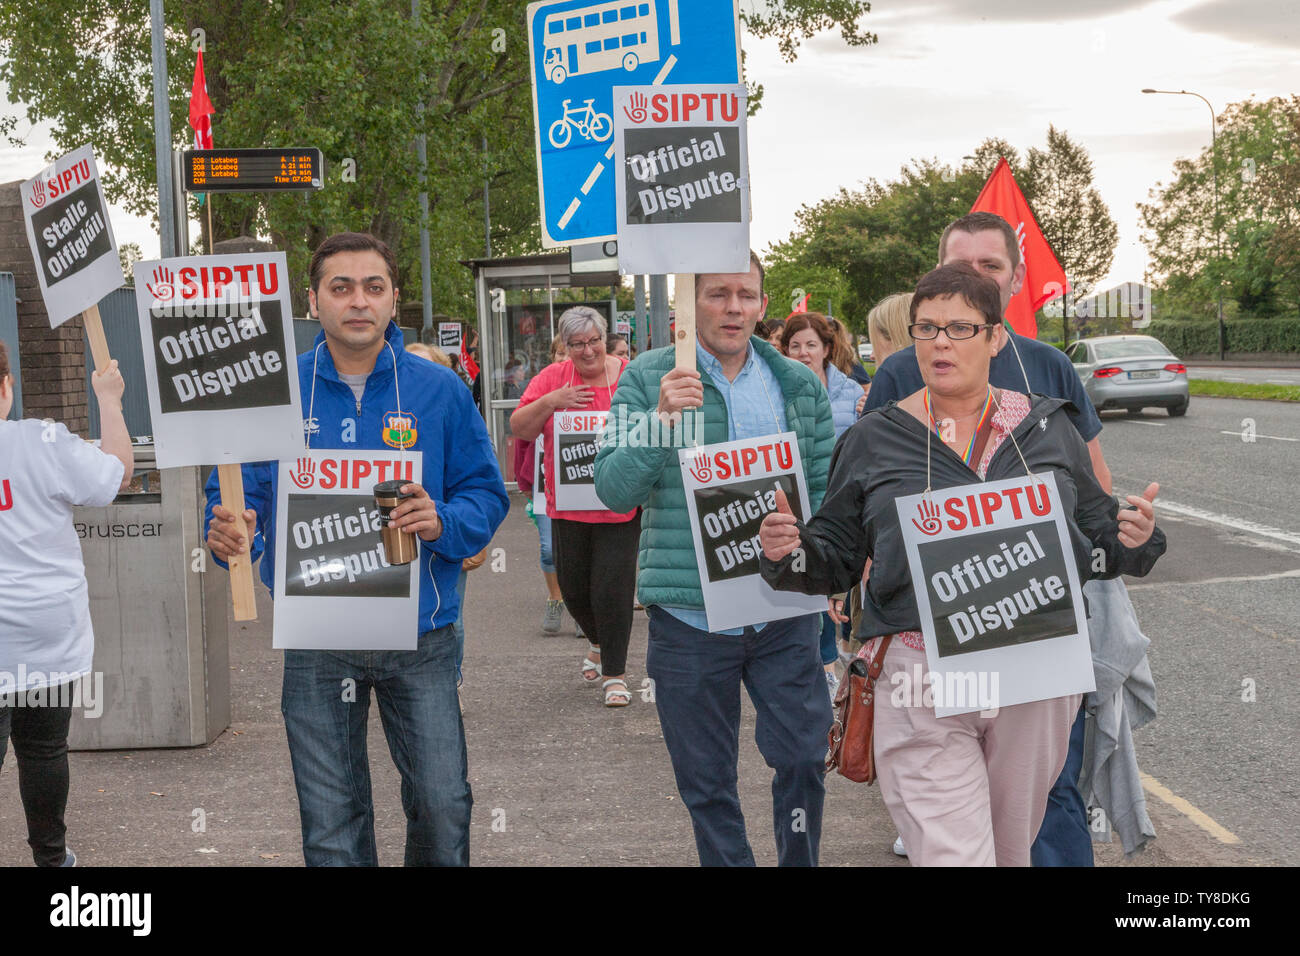 Cork City, Cork, Ireland. 26th June, 2019.  Strikers picketing outside Cork University Hospital in Cork City as part of their third 24-hour work stoppage by members of the Services, Industrial, Professional and Technical Union (SIPTU) in support of pay and staffing claim.  SIPTU are demanding pay rises for members worth over €19m that it says are due under a job evaluation scheme. The union says the increases are worth €1,500 to €3,000 for each member. Credit: David Creedon/Alamy Live News Stock Photo